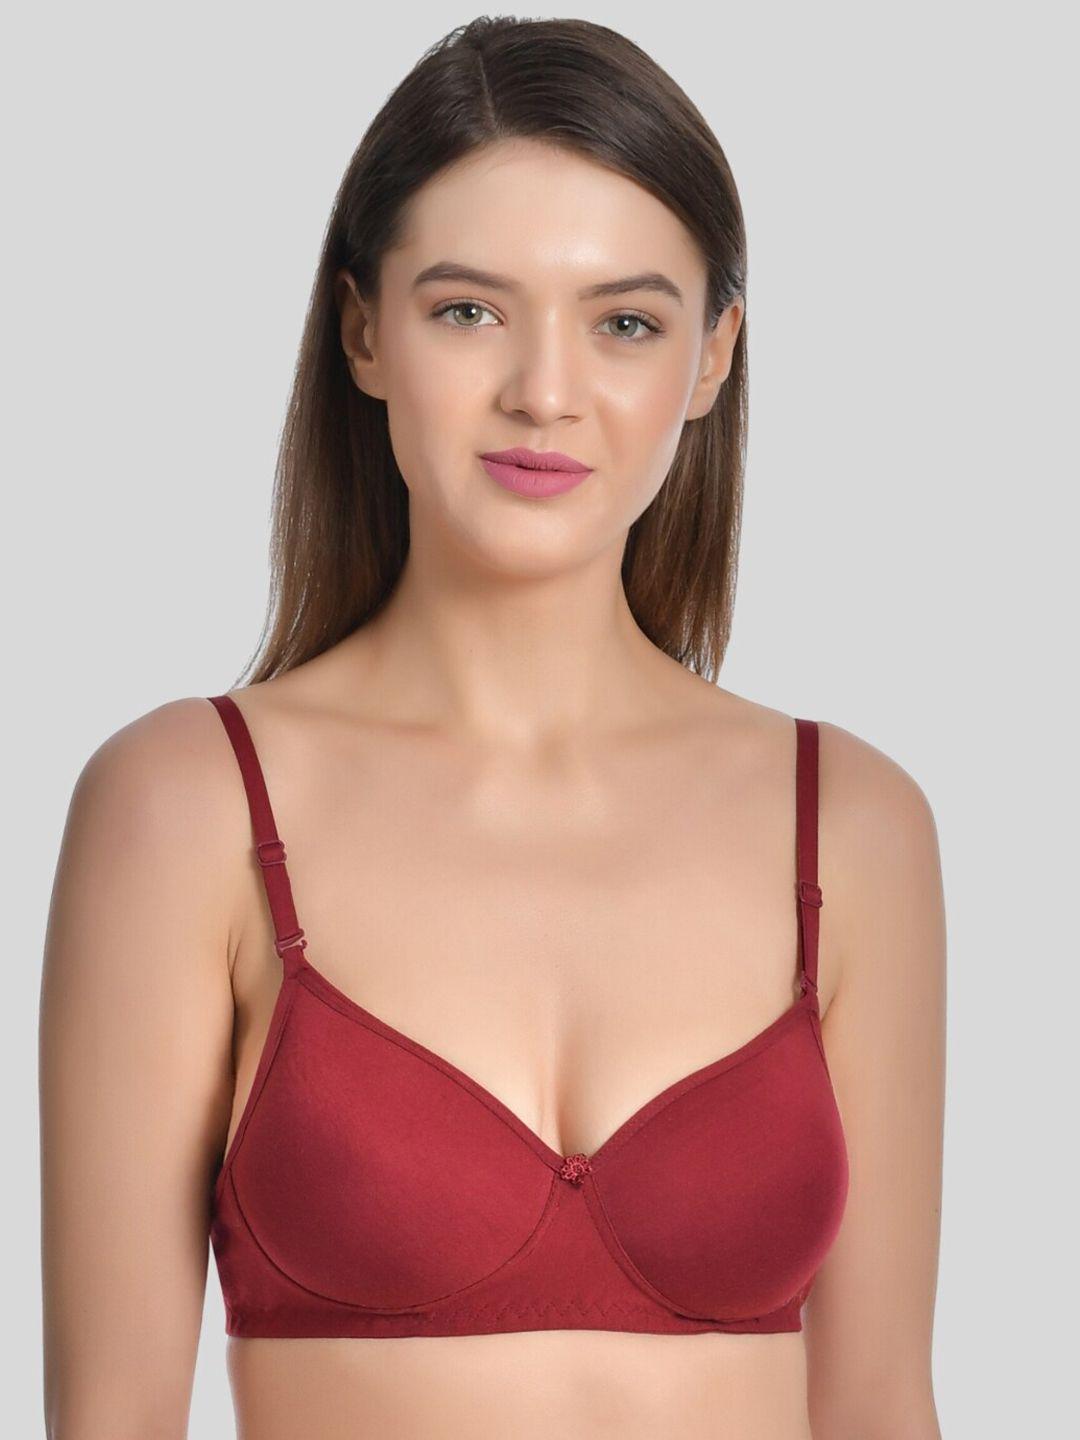 aimly seamless full coverage all day comfort non-wired heavily-padded cotton t-shirt bra